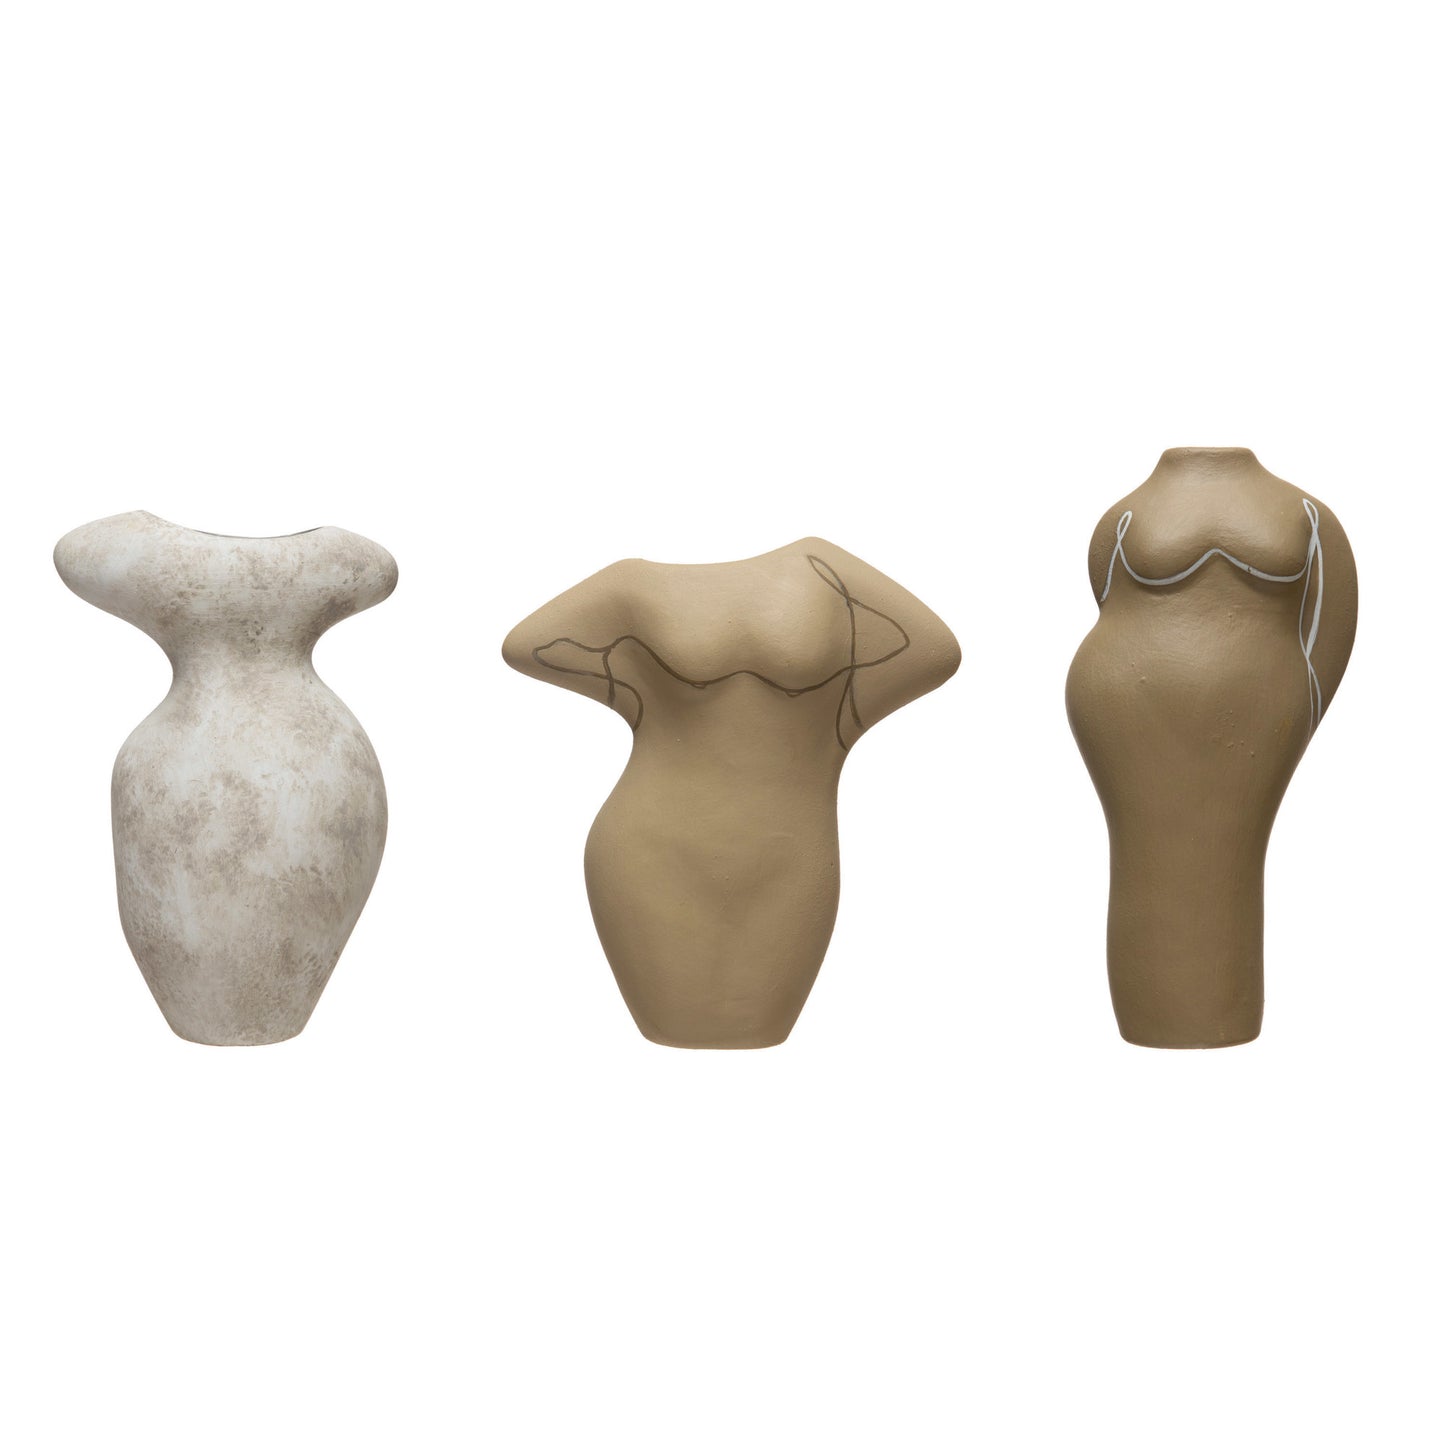 Vase - Terracotta Bodies 3 Colors Set of 3 - Sold Separately